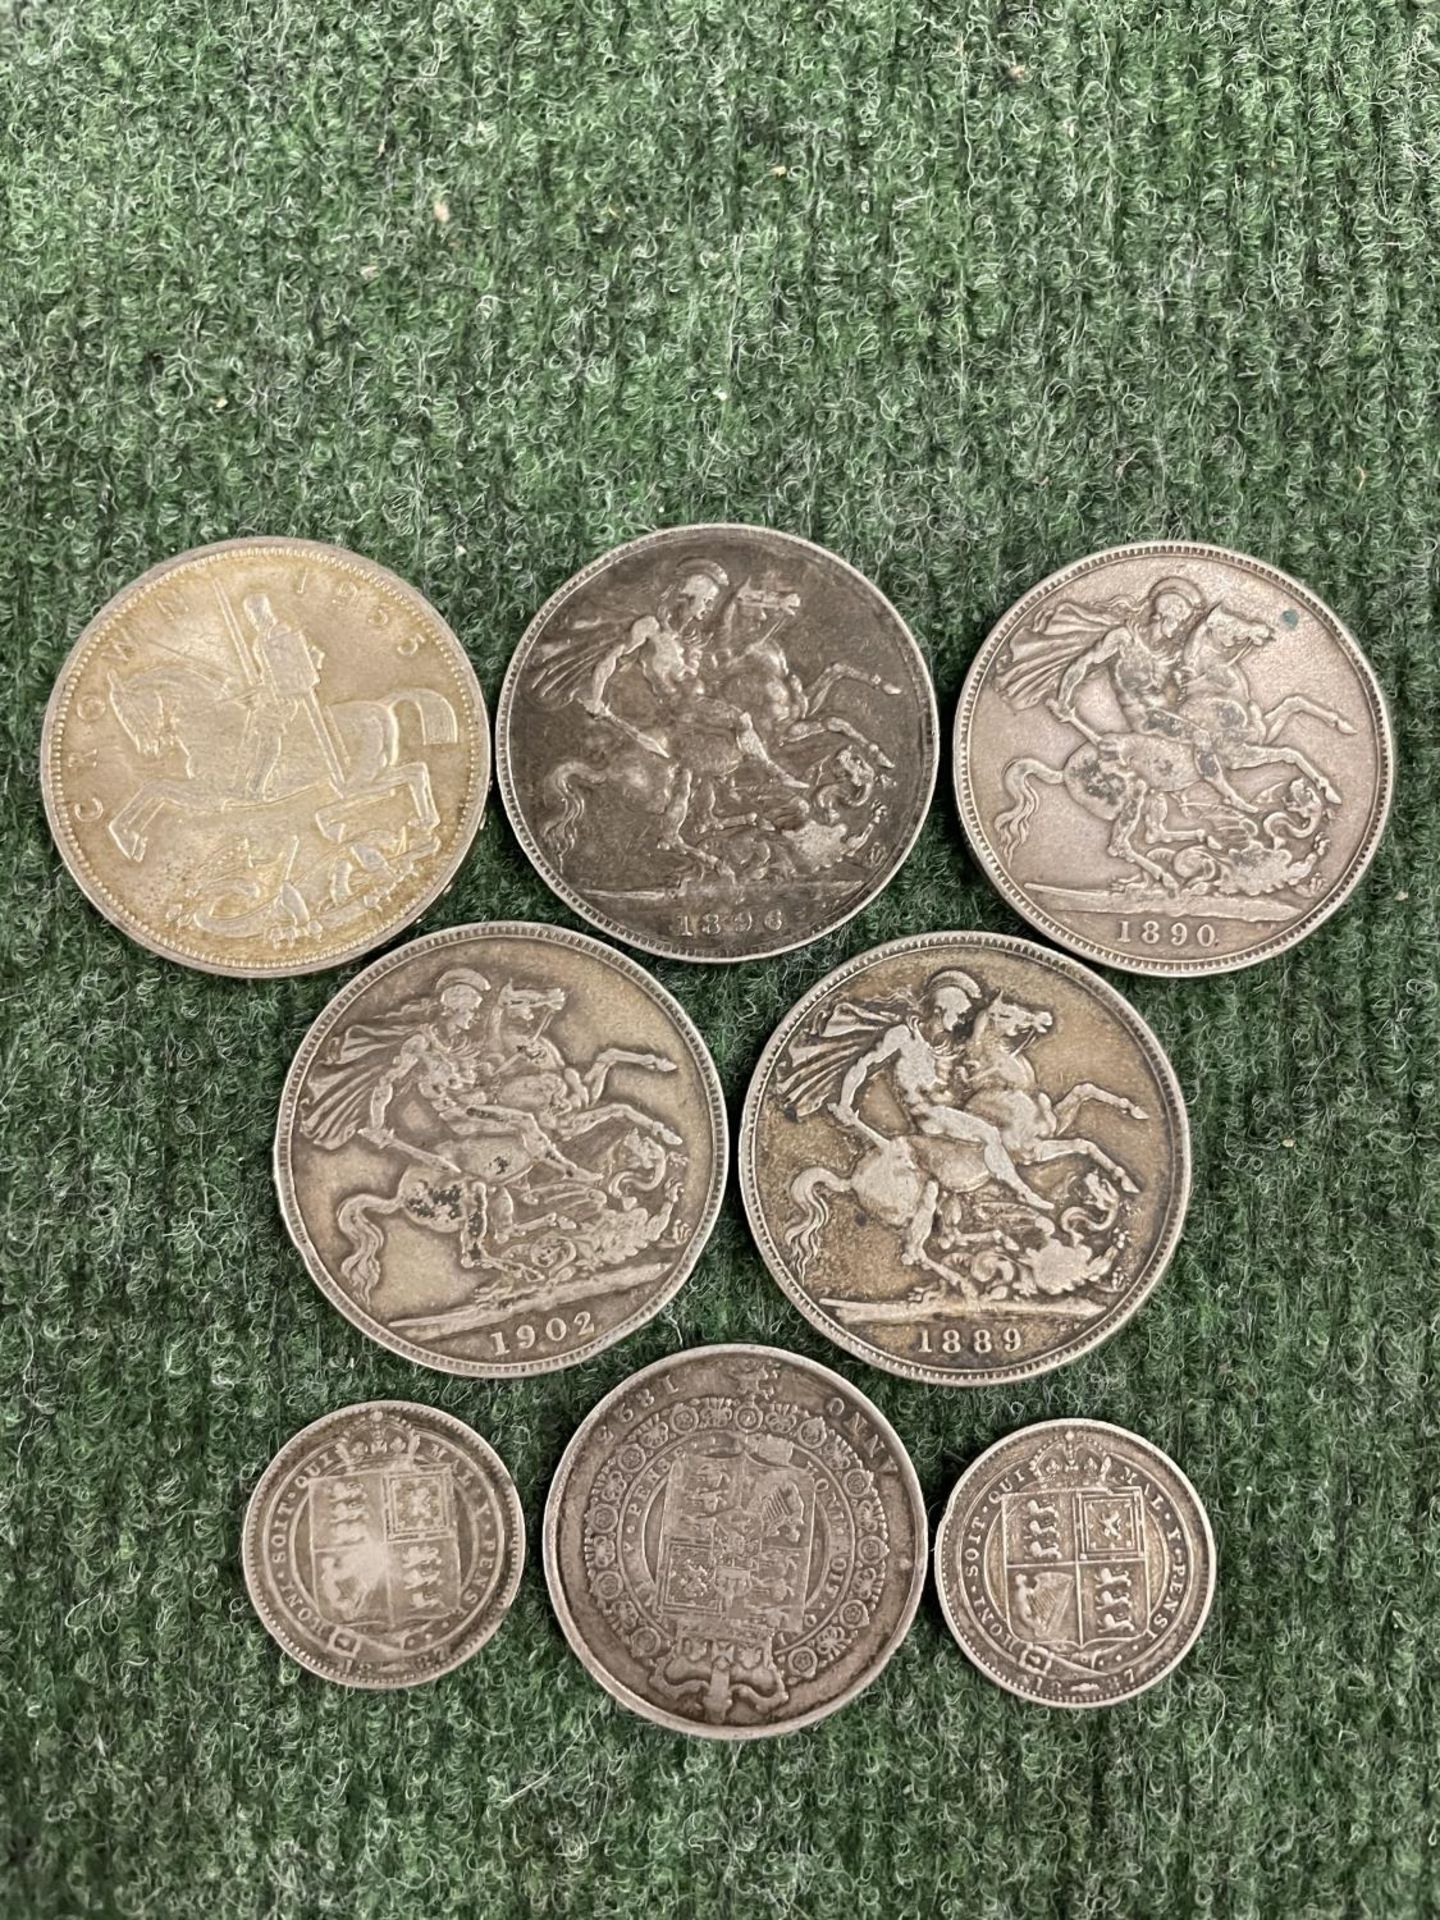 FIVE SILVER CROWNS , 1889, 90, 96, 1902 AND 1935, AN 1823 HALF CROWN AND TWO 1887 SHILLINGS